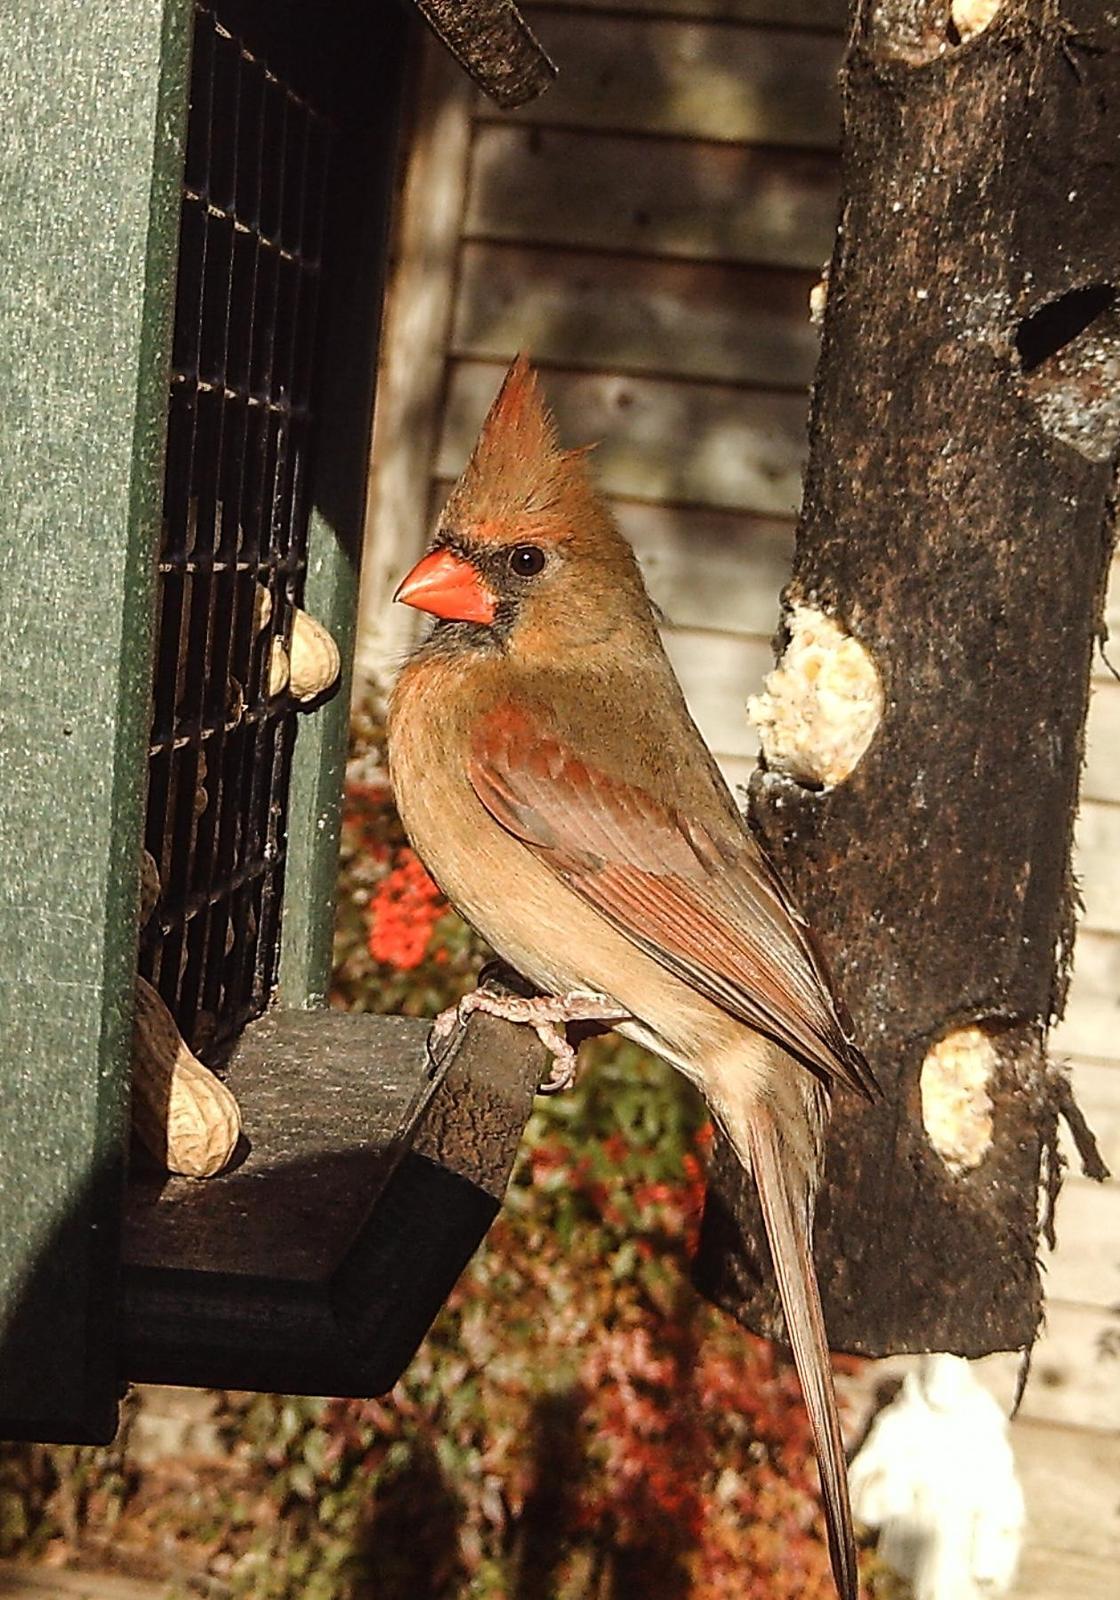 Northern Cardinal (Common) Photo by Mike Ballentine